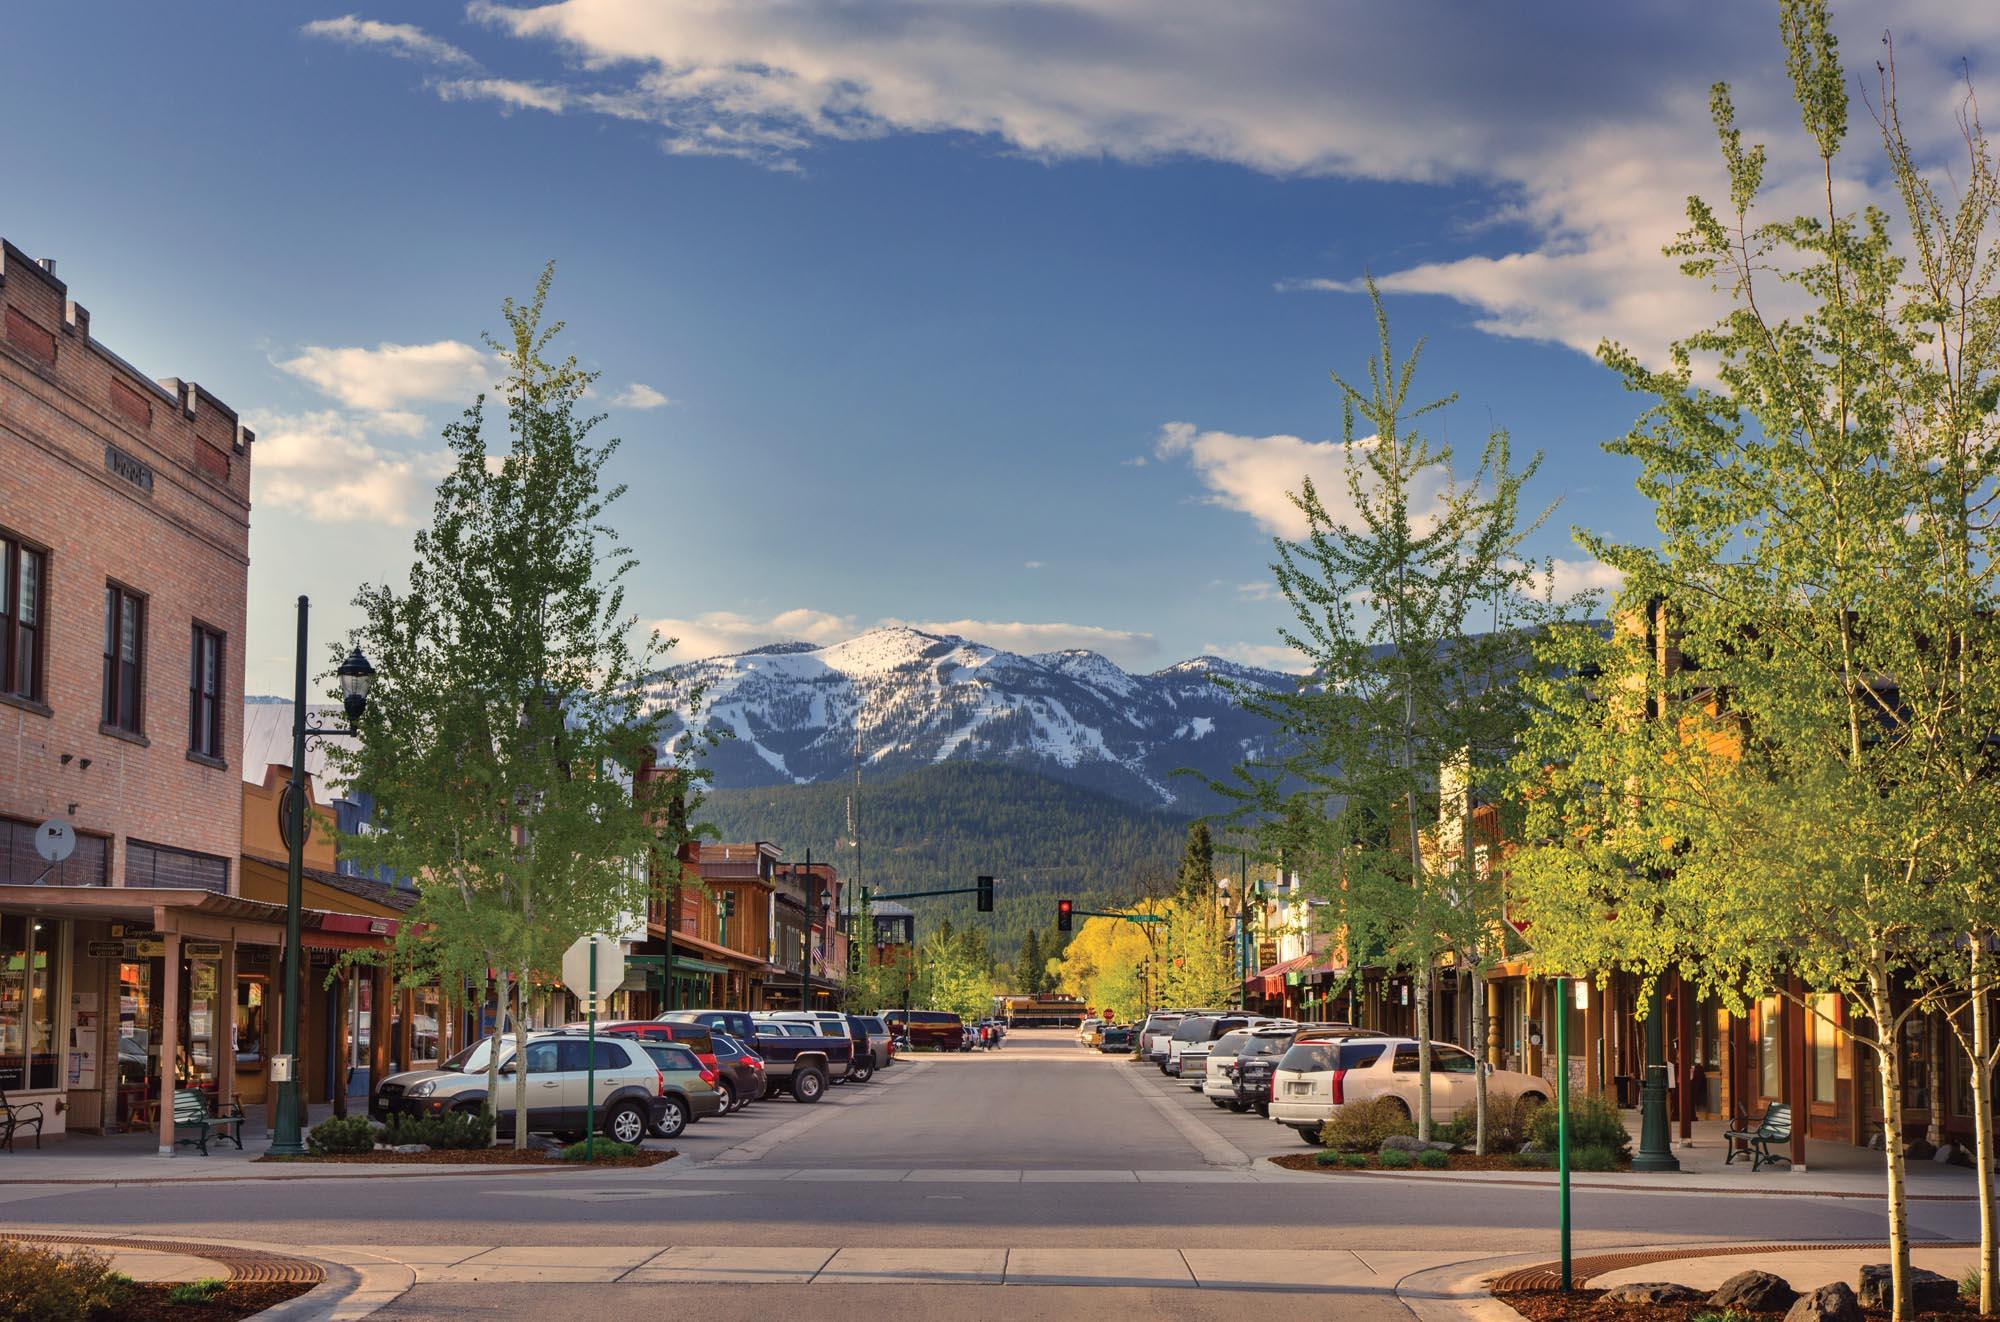 Downtown Whitefish. Photo: Chuck Haney